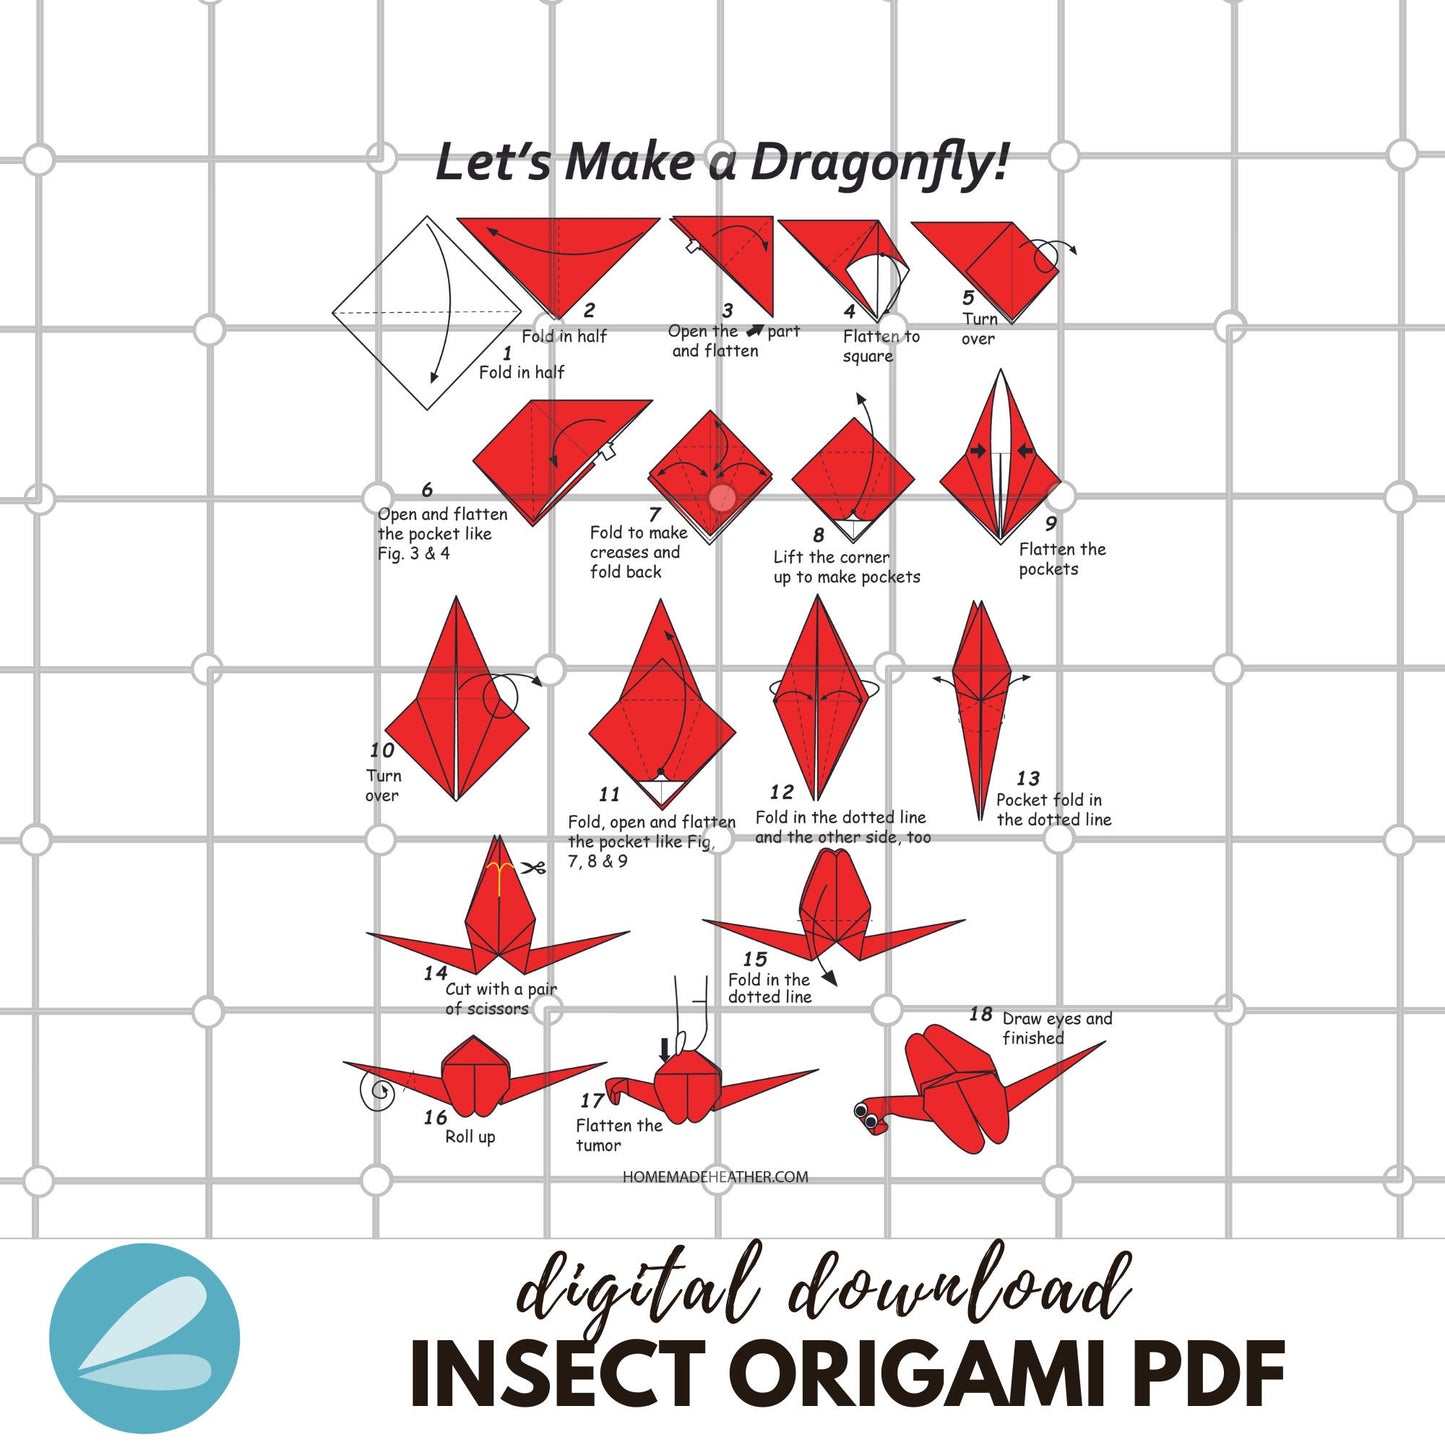 Origami Insect Printable Pages - Insect Origami PDF - Instant Download